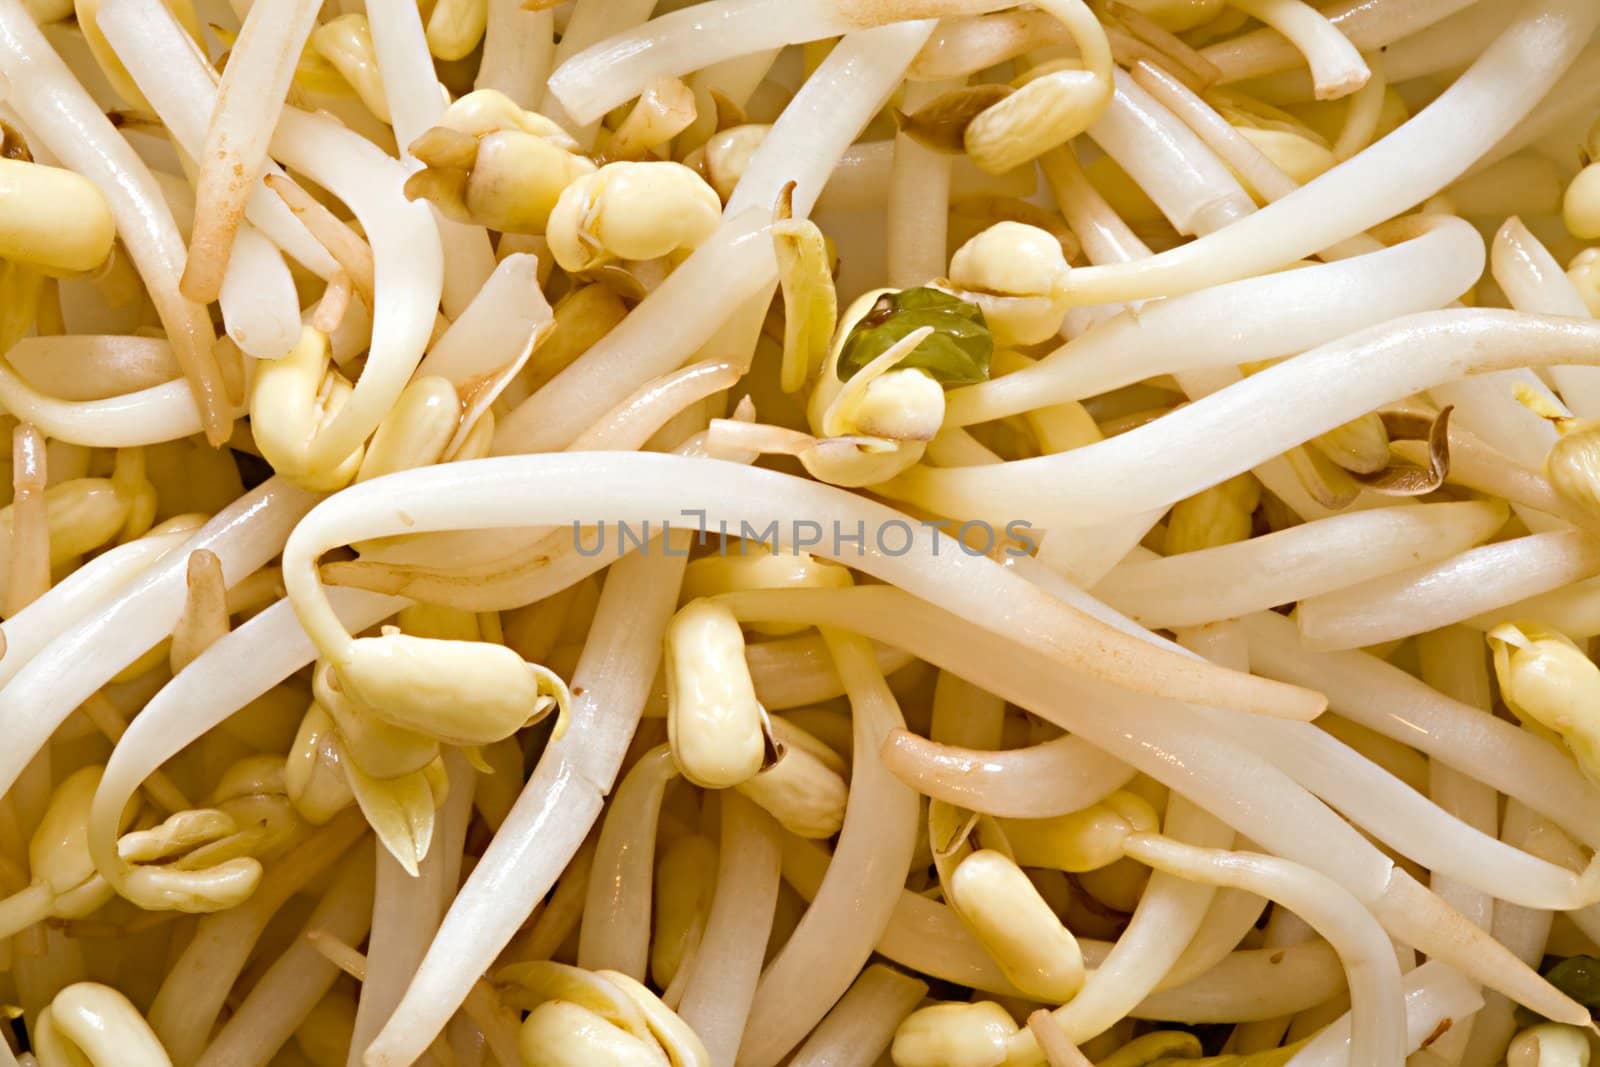 Edible sprouts of wheat close up
